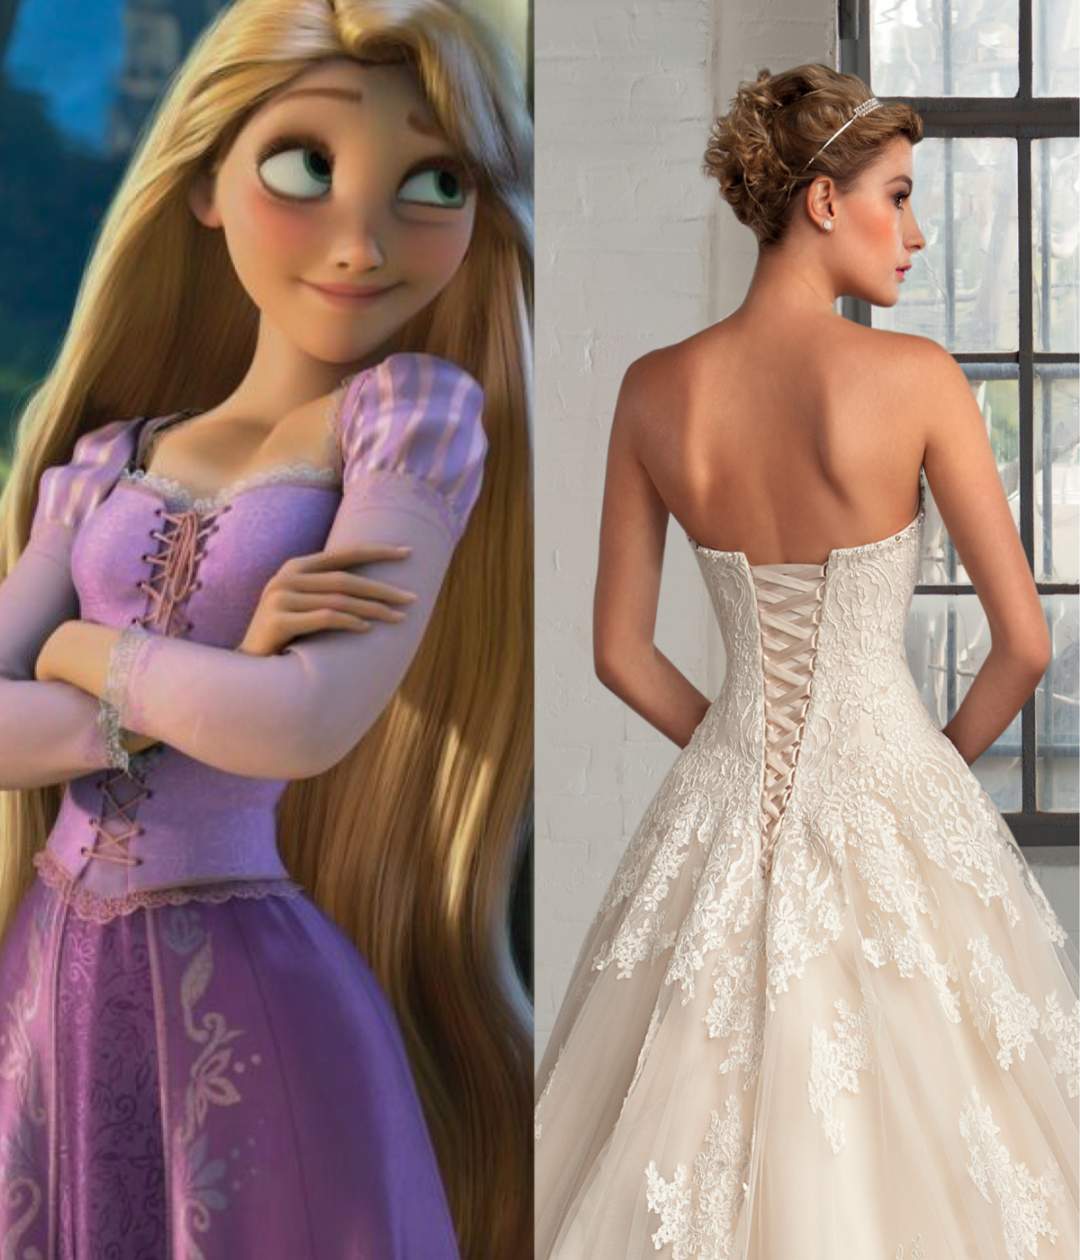 Rapunzel would love the lace up bodice on this princess dress with ribbons tangled.